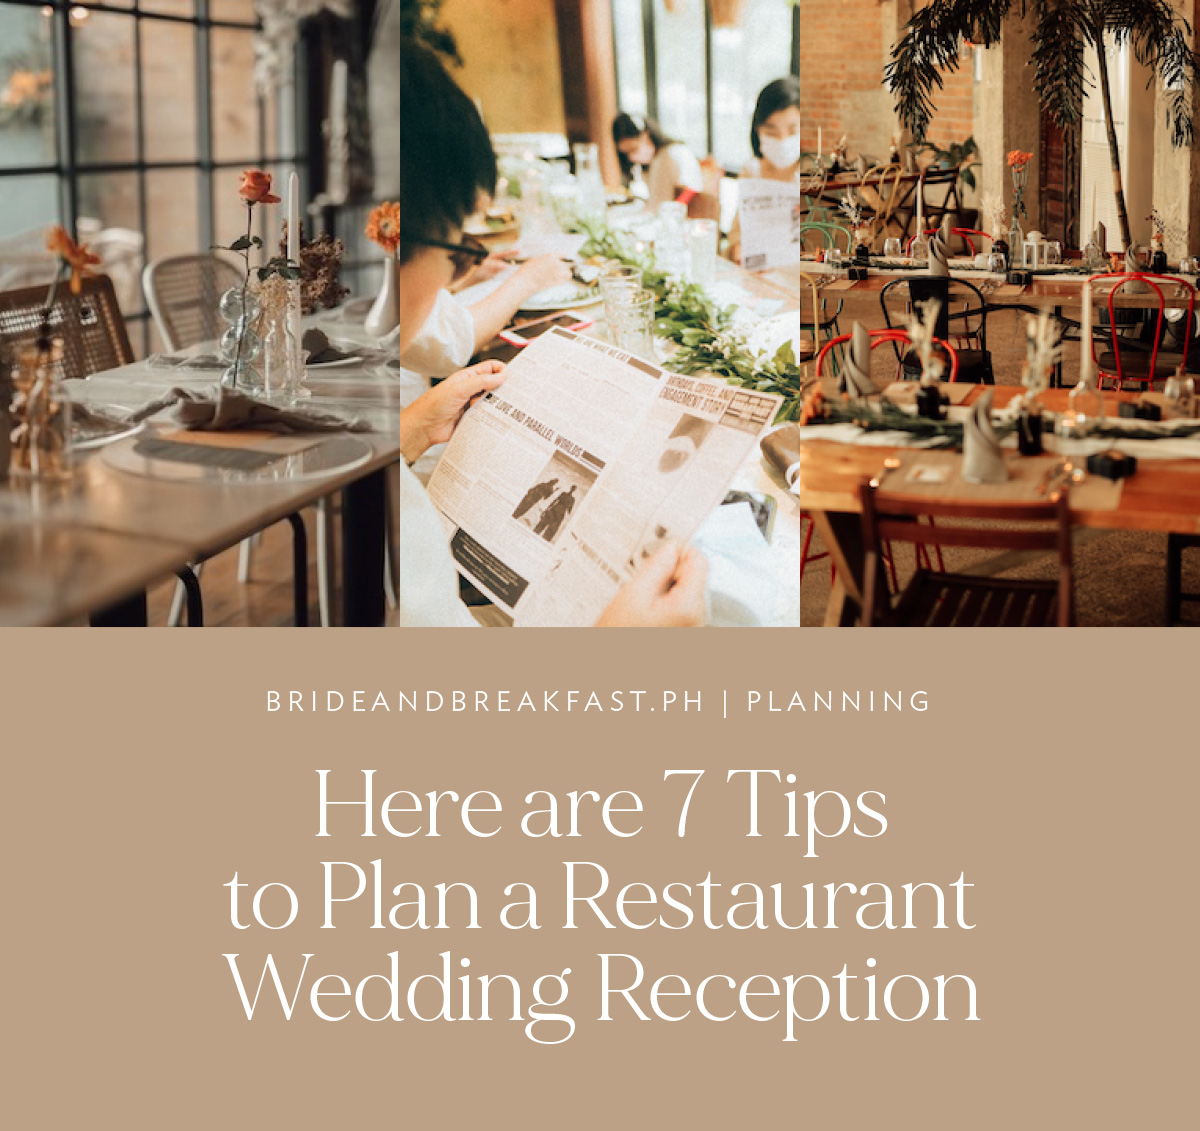 Here are 7 Tips to Plan a Restaurant Wedding Reception